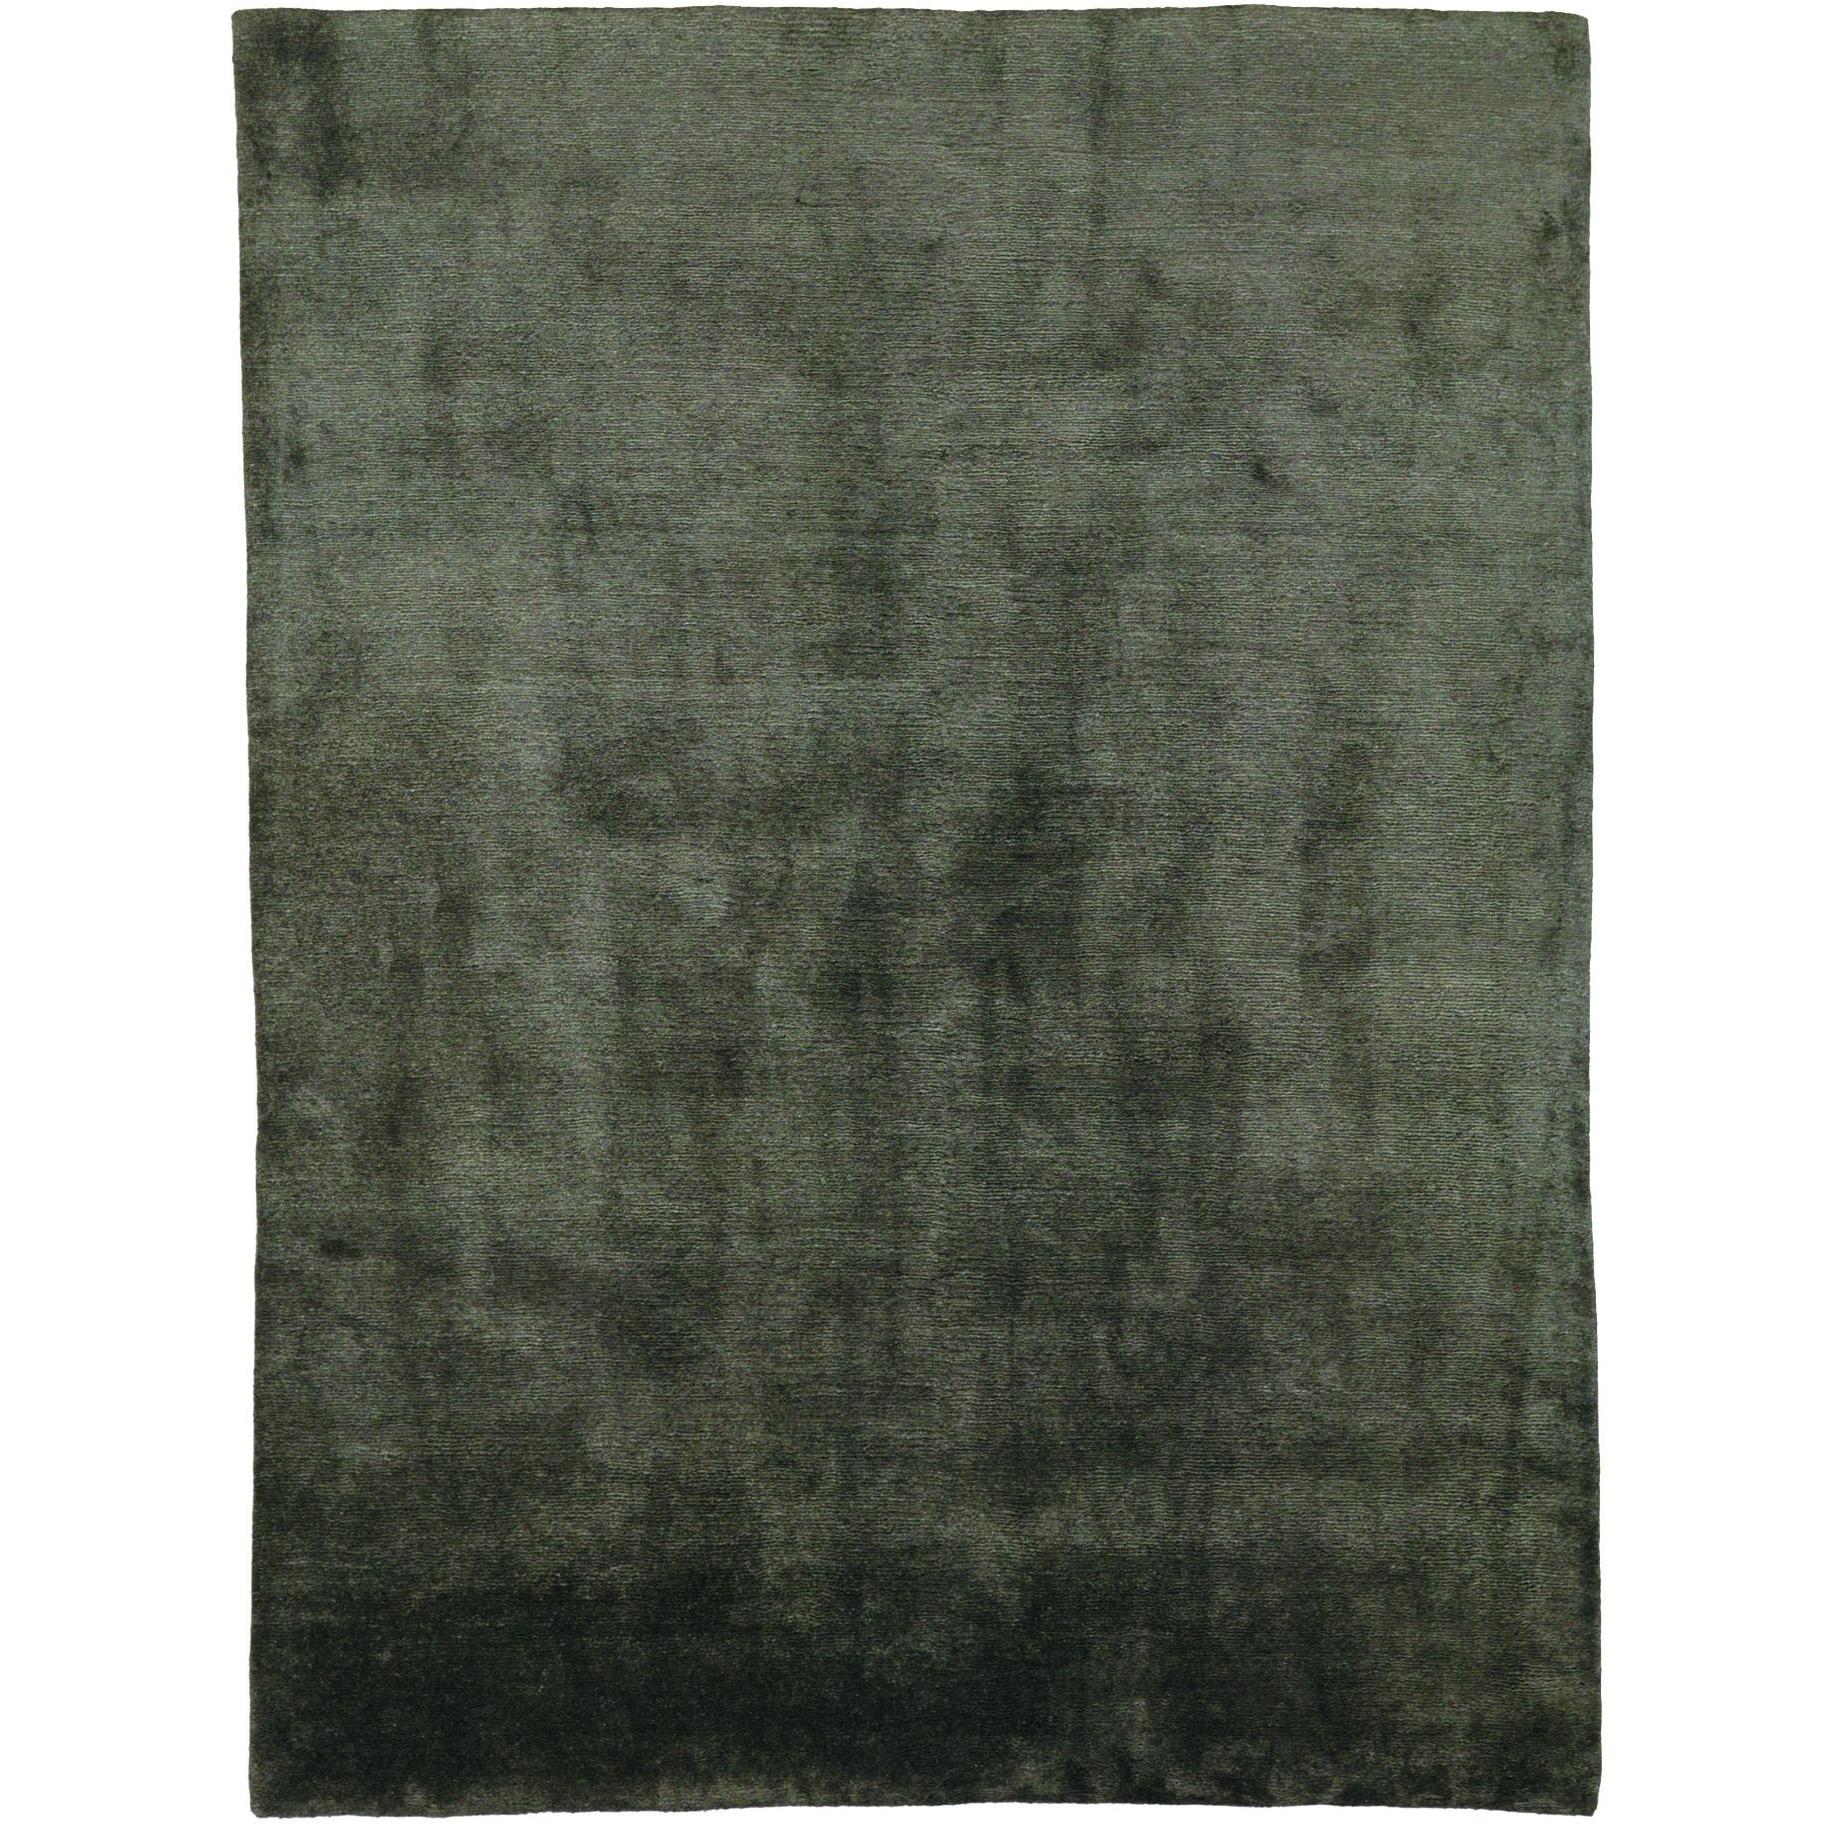 Mohair Slate Short Pile 6x4 Hand-Knotted Area Rug in Wool by The Rug Company